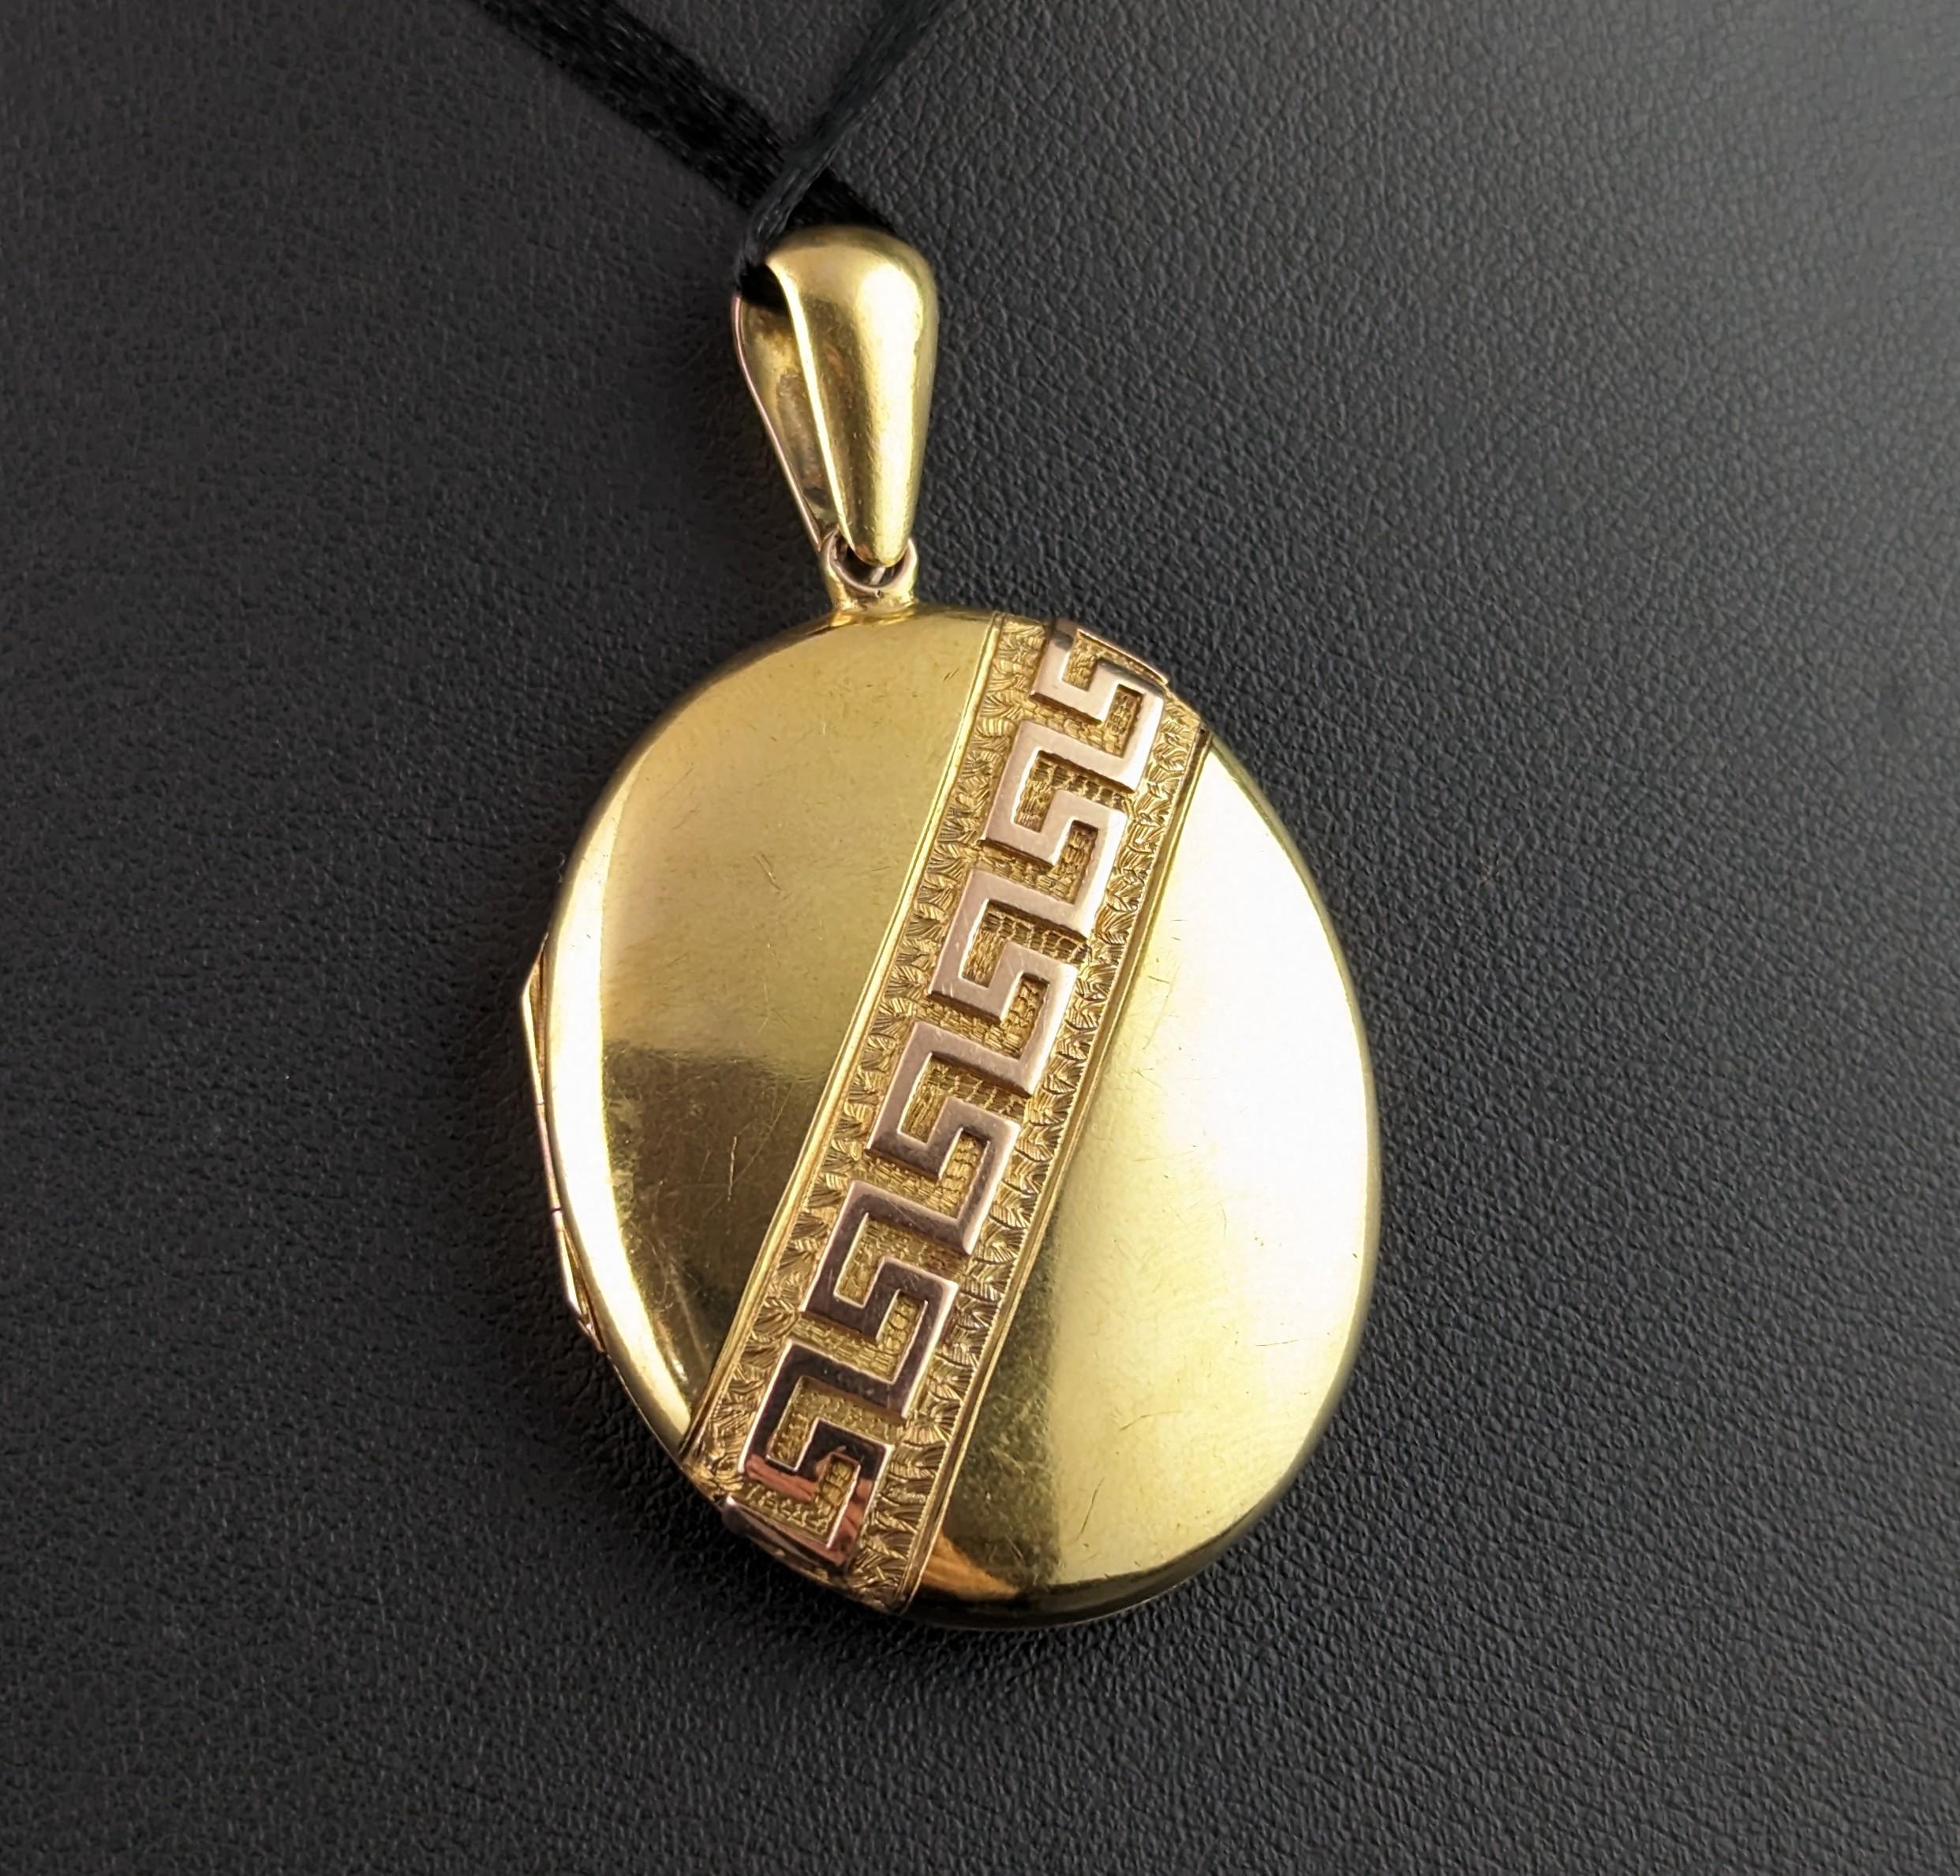 This beautiful antique 15ct gold locket is really very special.

Rich buttery 15ct yellow gold with a stylish Greek key design diagonally running down across the front of the locket.

This design runs down the back of the locket and there is a blank